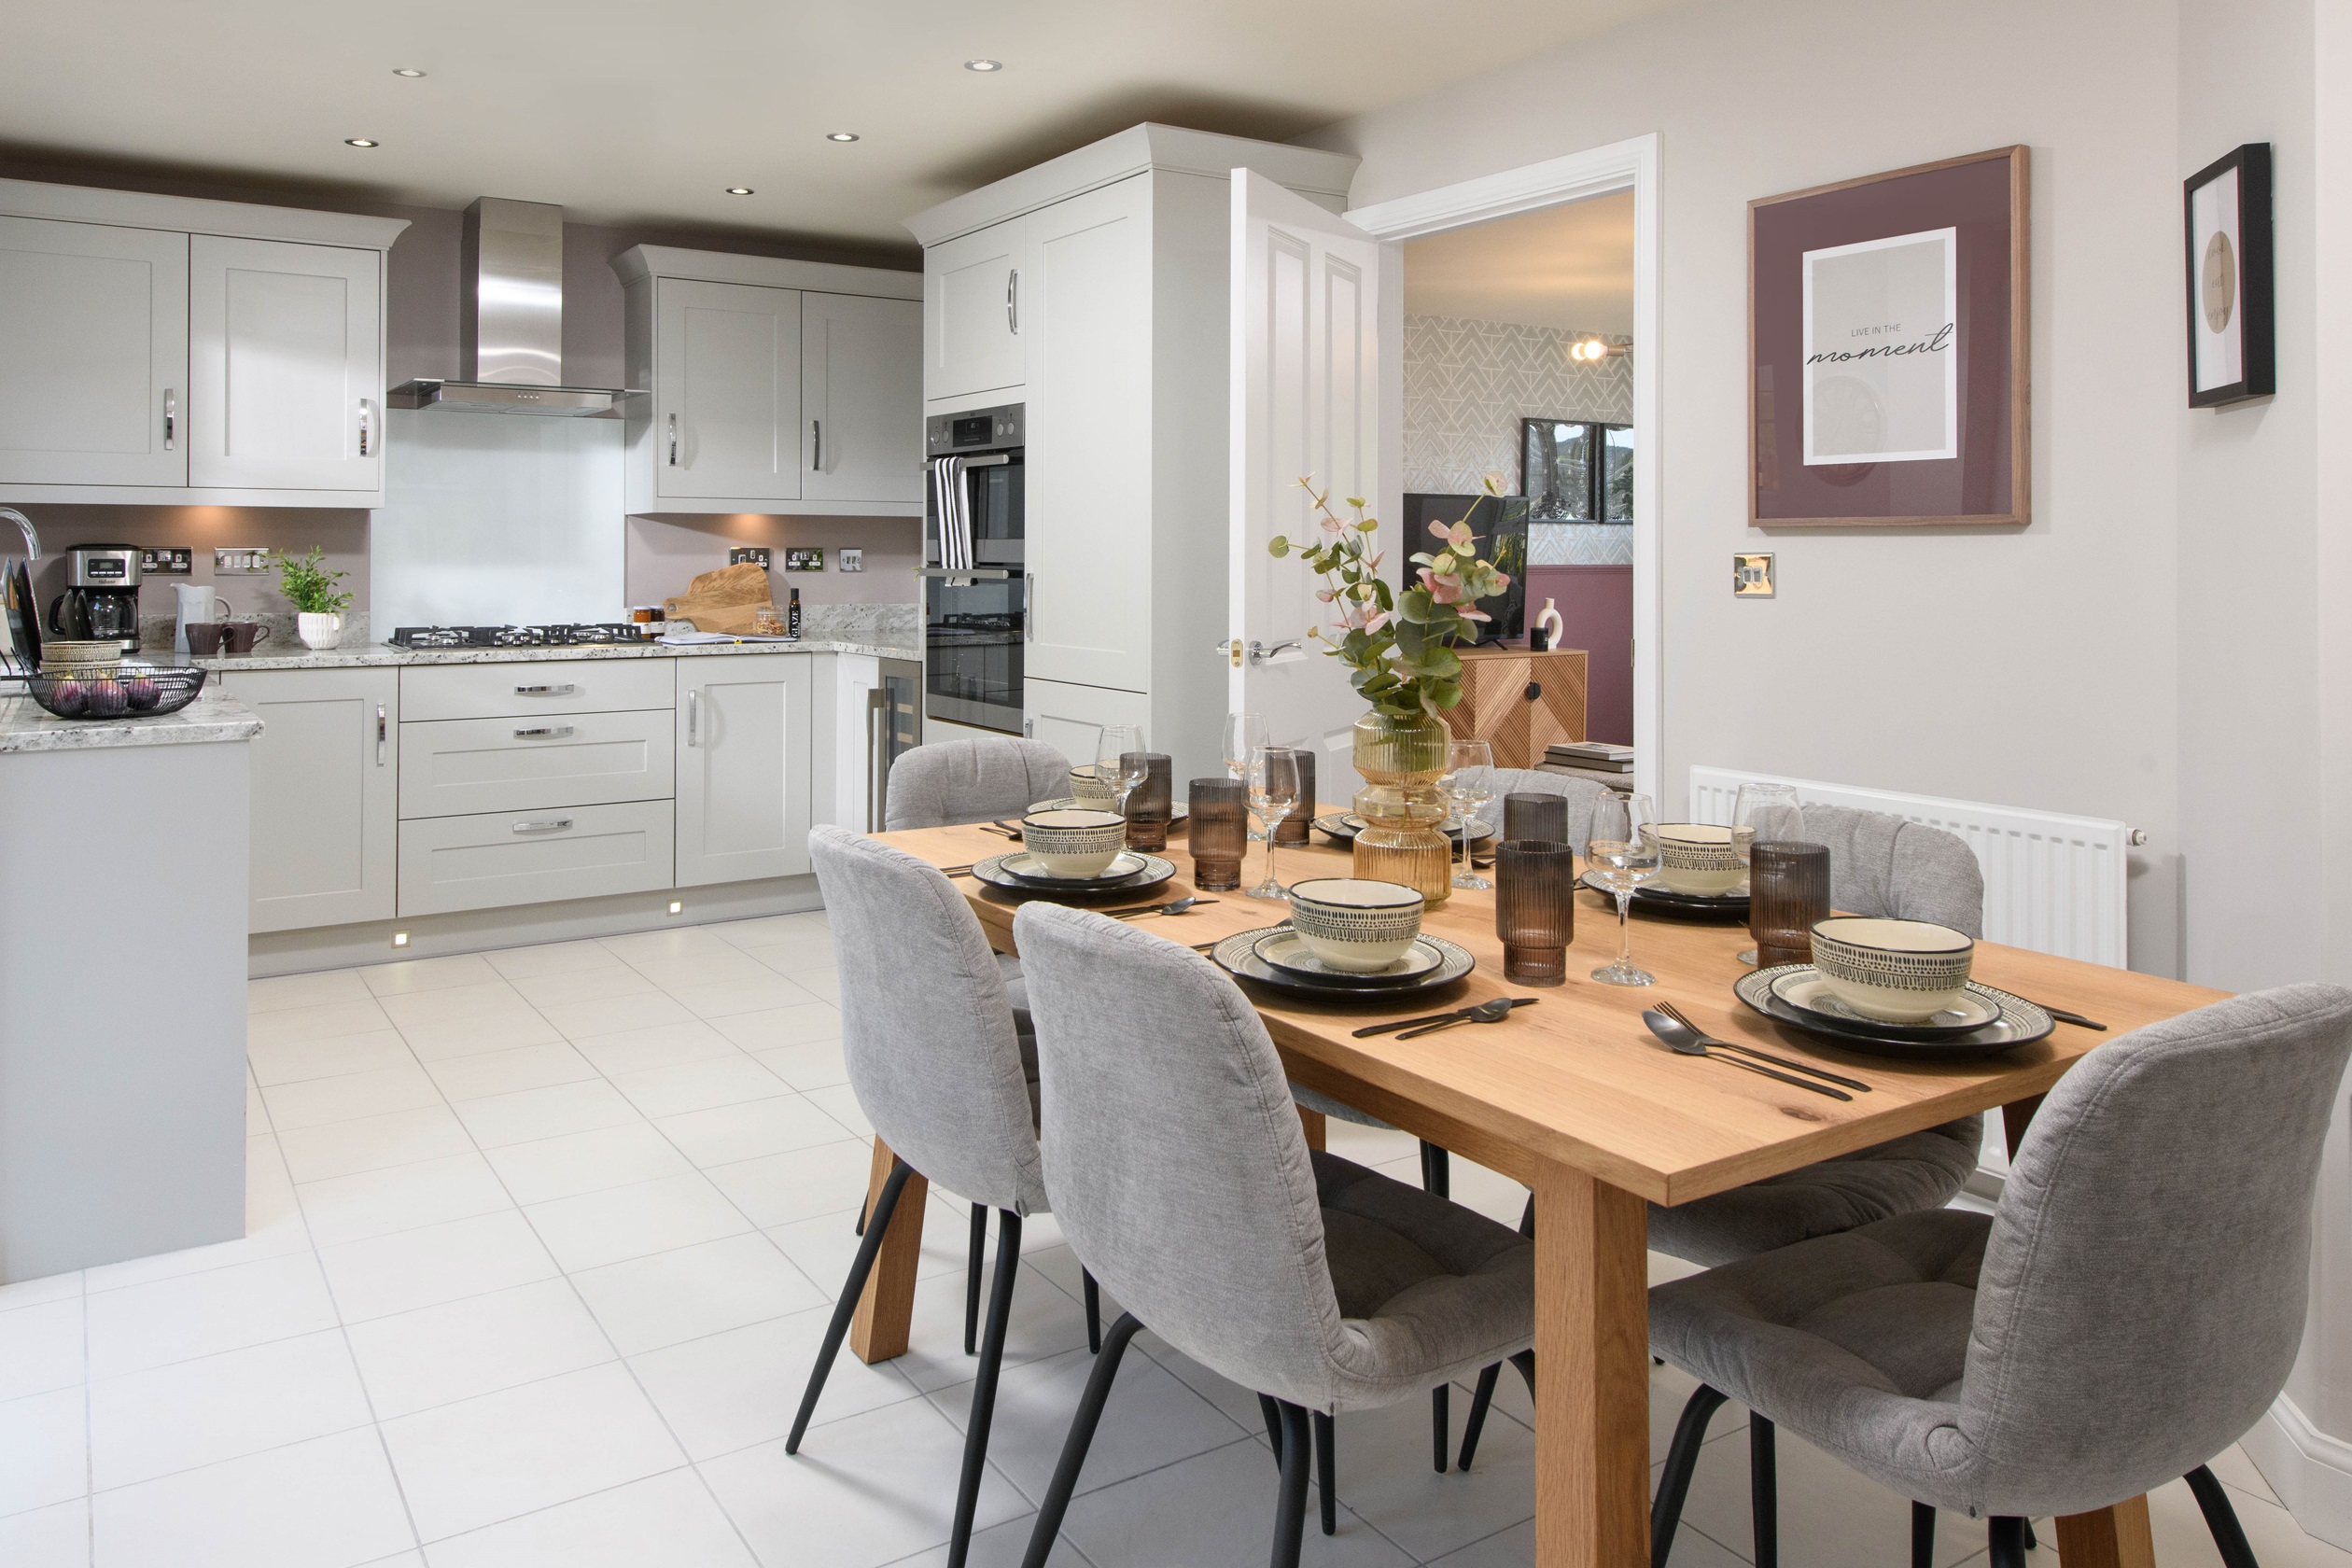 Property 2 of 8. The Mews Windermere Dining Kitchen